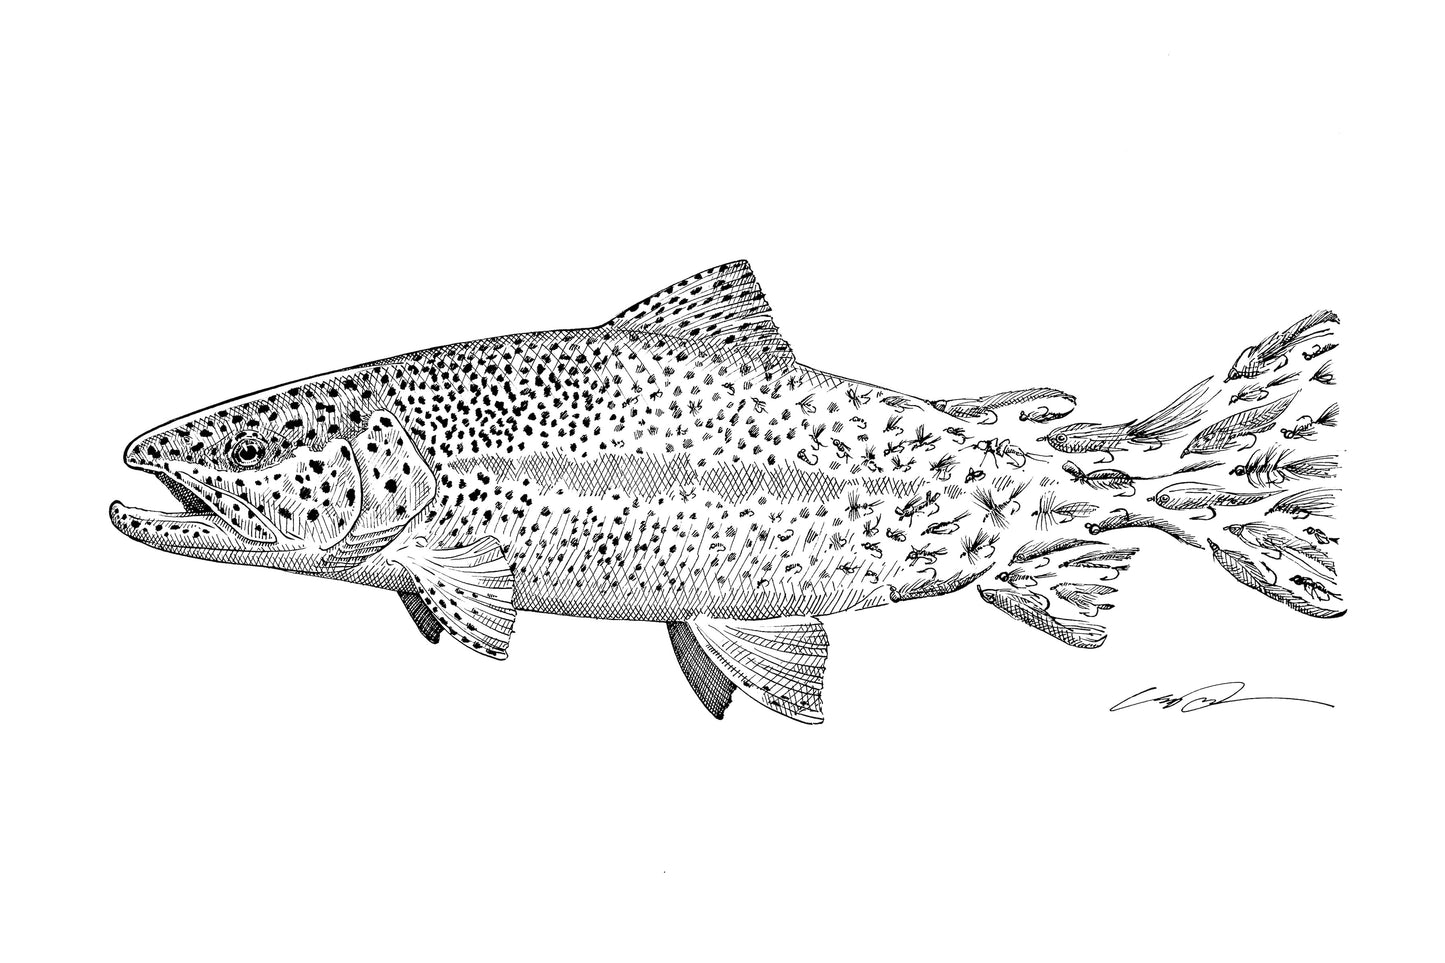 A pen and ink drawing of a rainbow trout where the trout's spots fade into flies to form the tail of the fish.